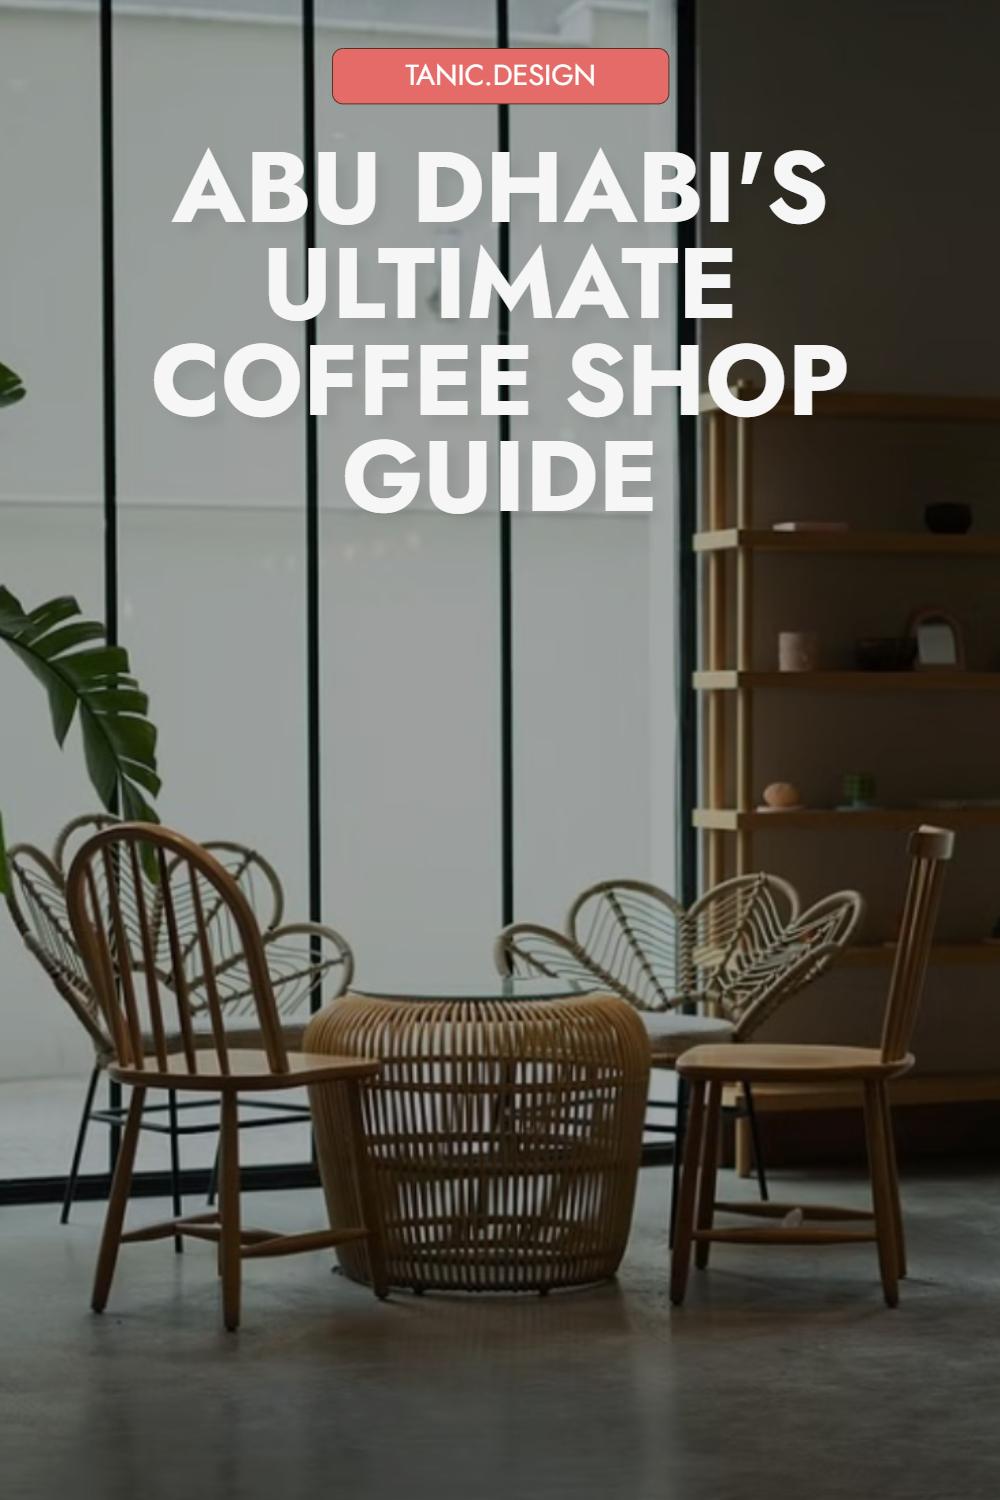 The ultimate guide to coffee shop interior design in Abu Dhabi.